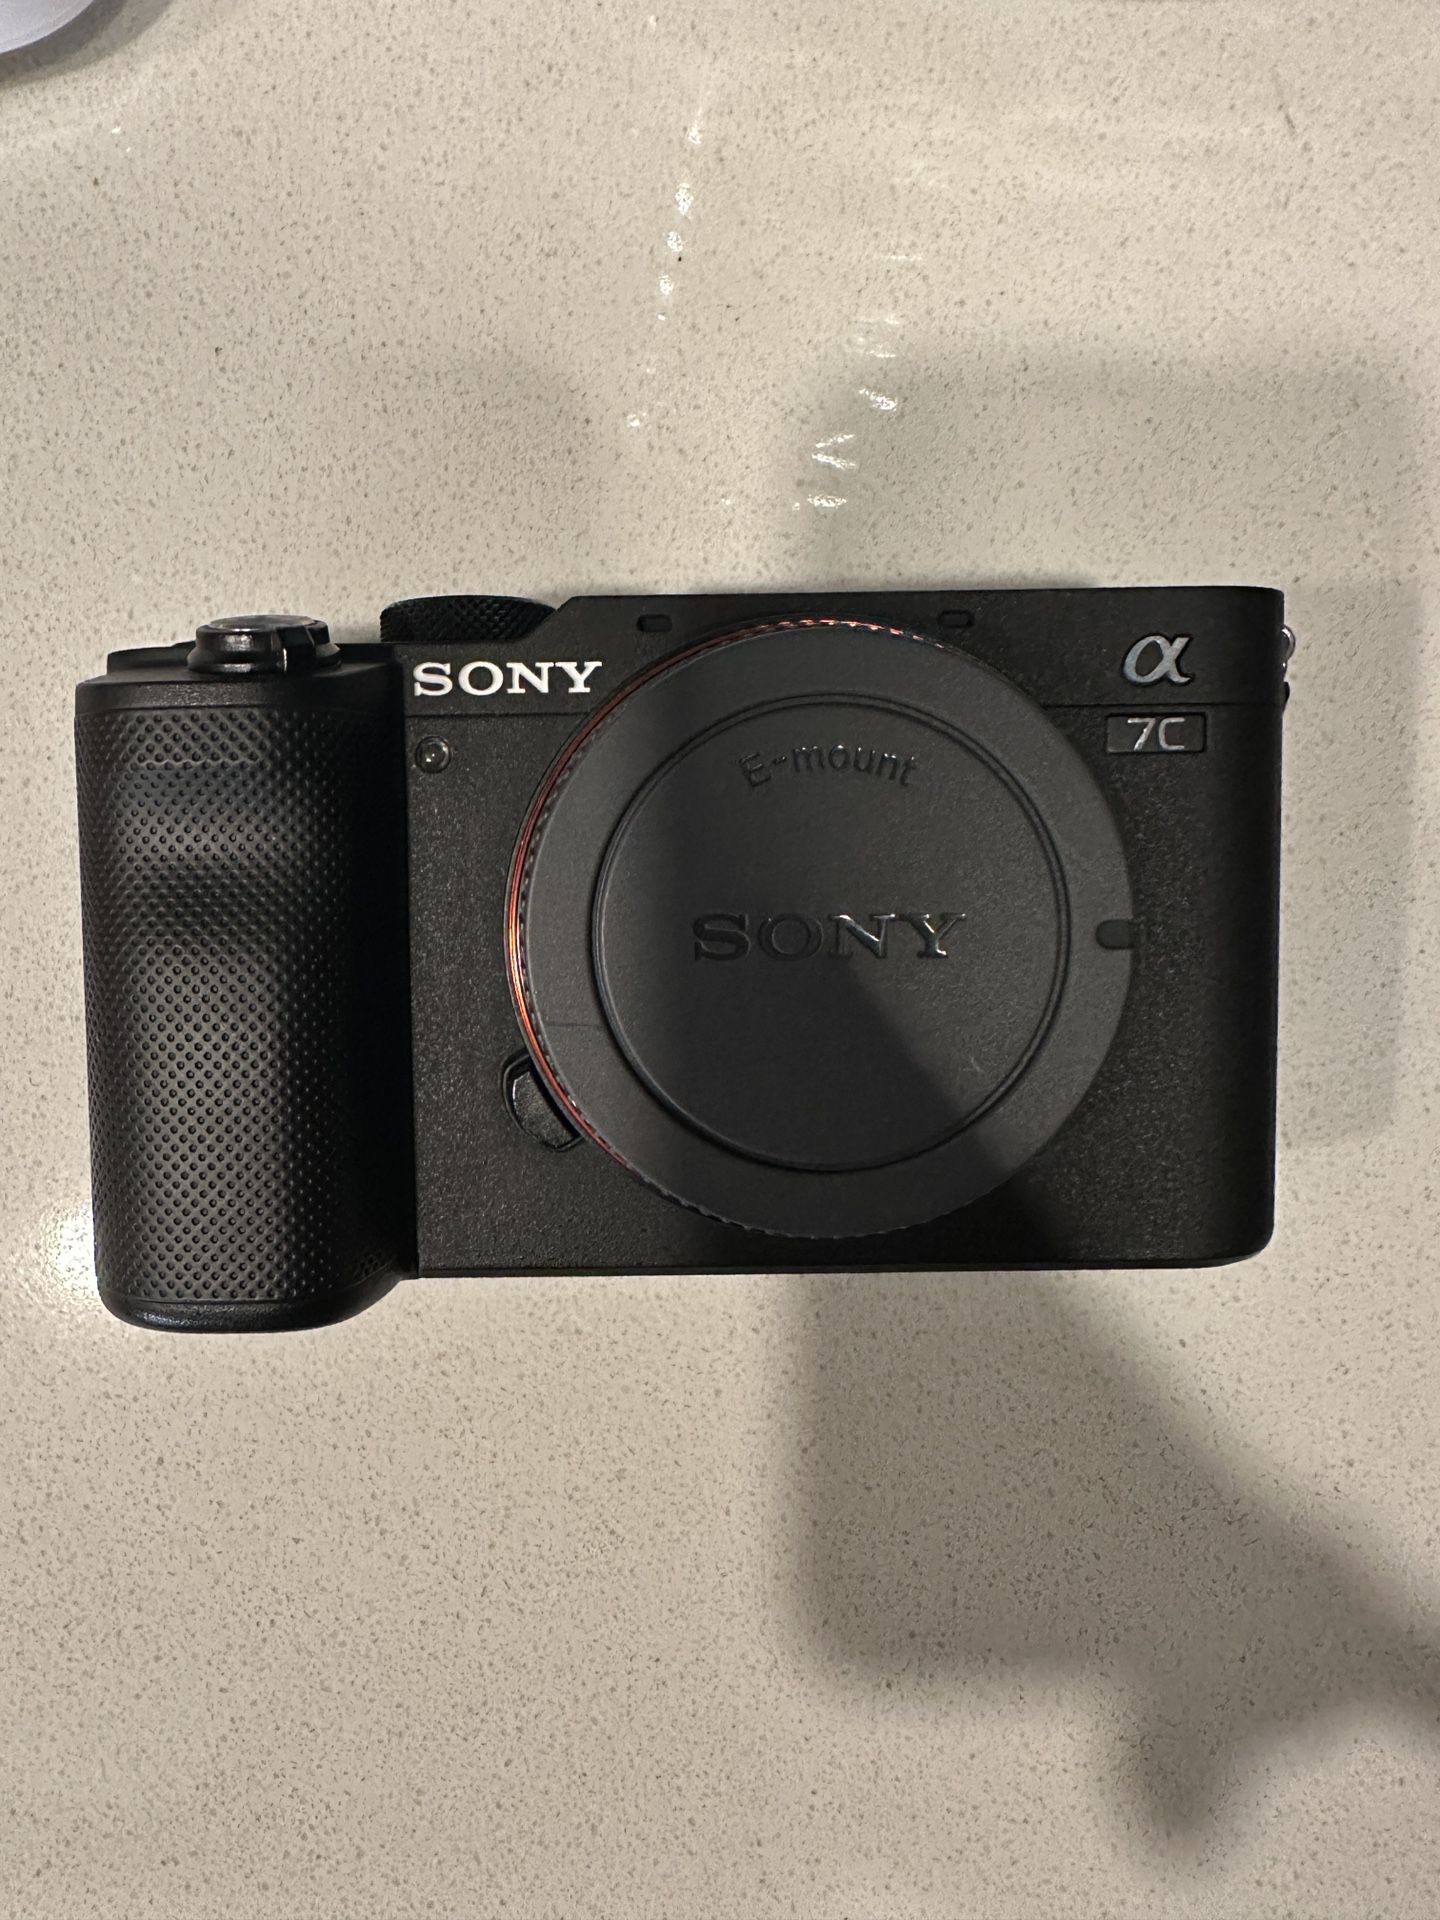 Sony A7C Like New, Barely Used